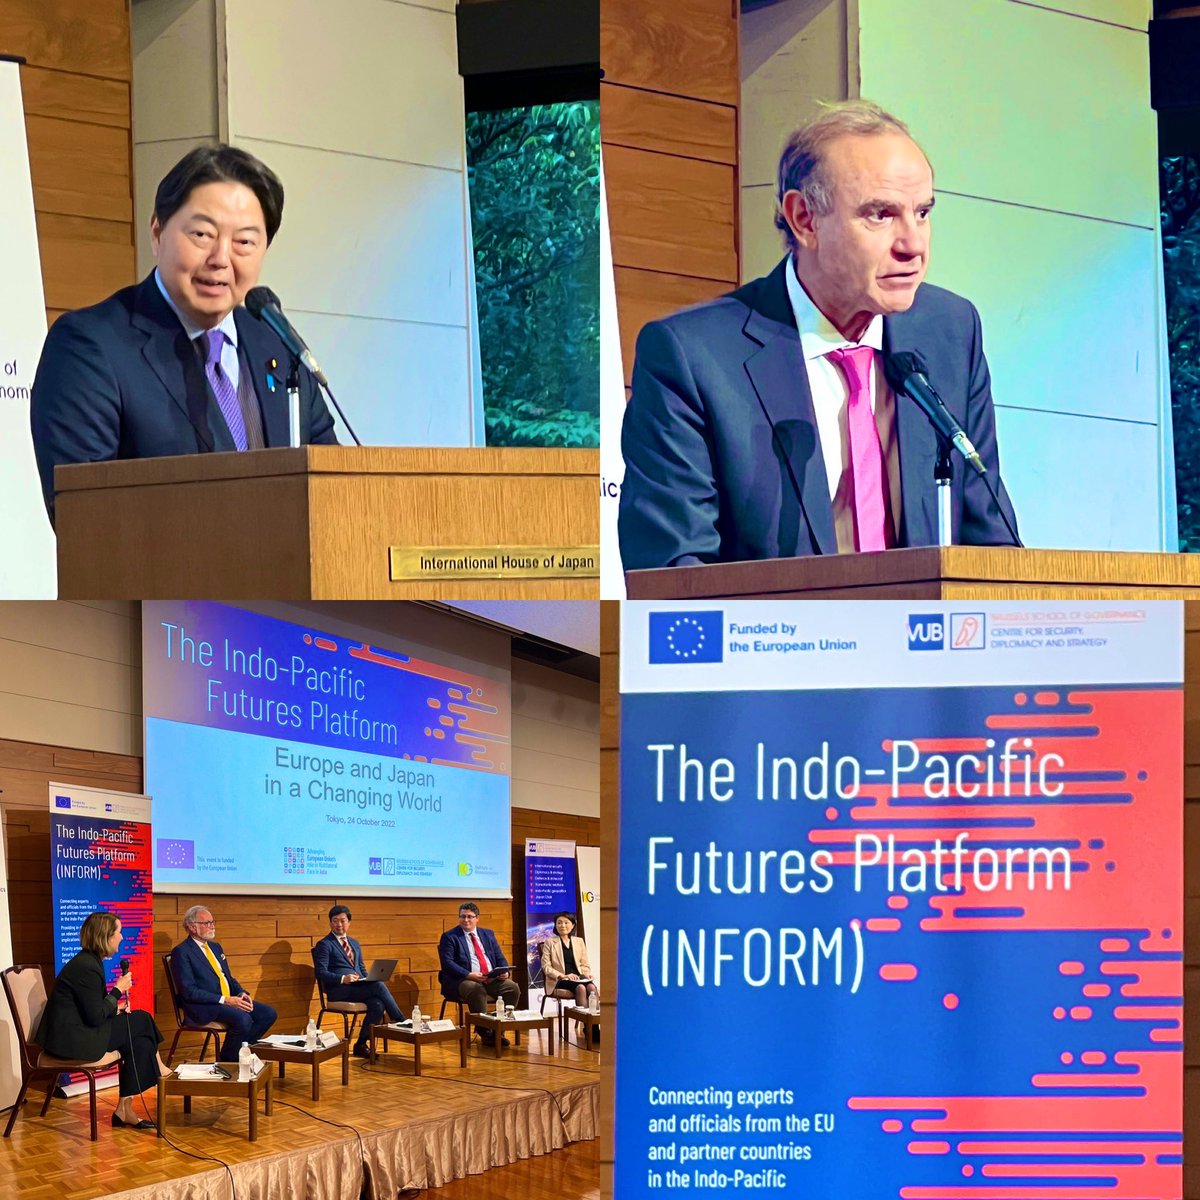 At the #IndoPacific Futures Platform public forum in Tokyo, we discussed EU-Japan cooperation and the future of #multilateralism in the region. The 🇯🇵🇪🇺 partnership is coming into its own, but there is an eagerness to deepen ties in concrete ways. This is the goal of #INFORM.